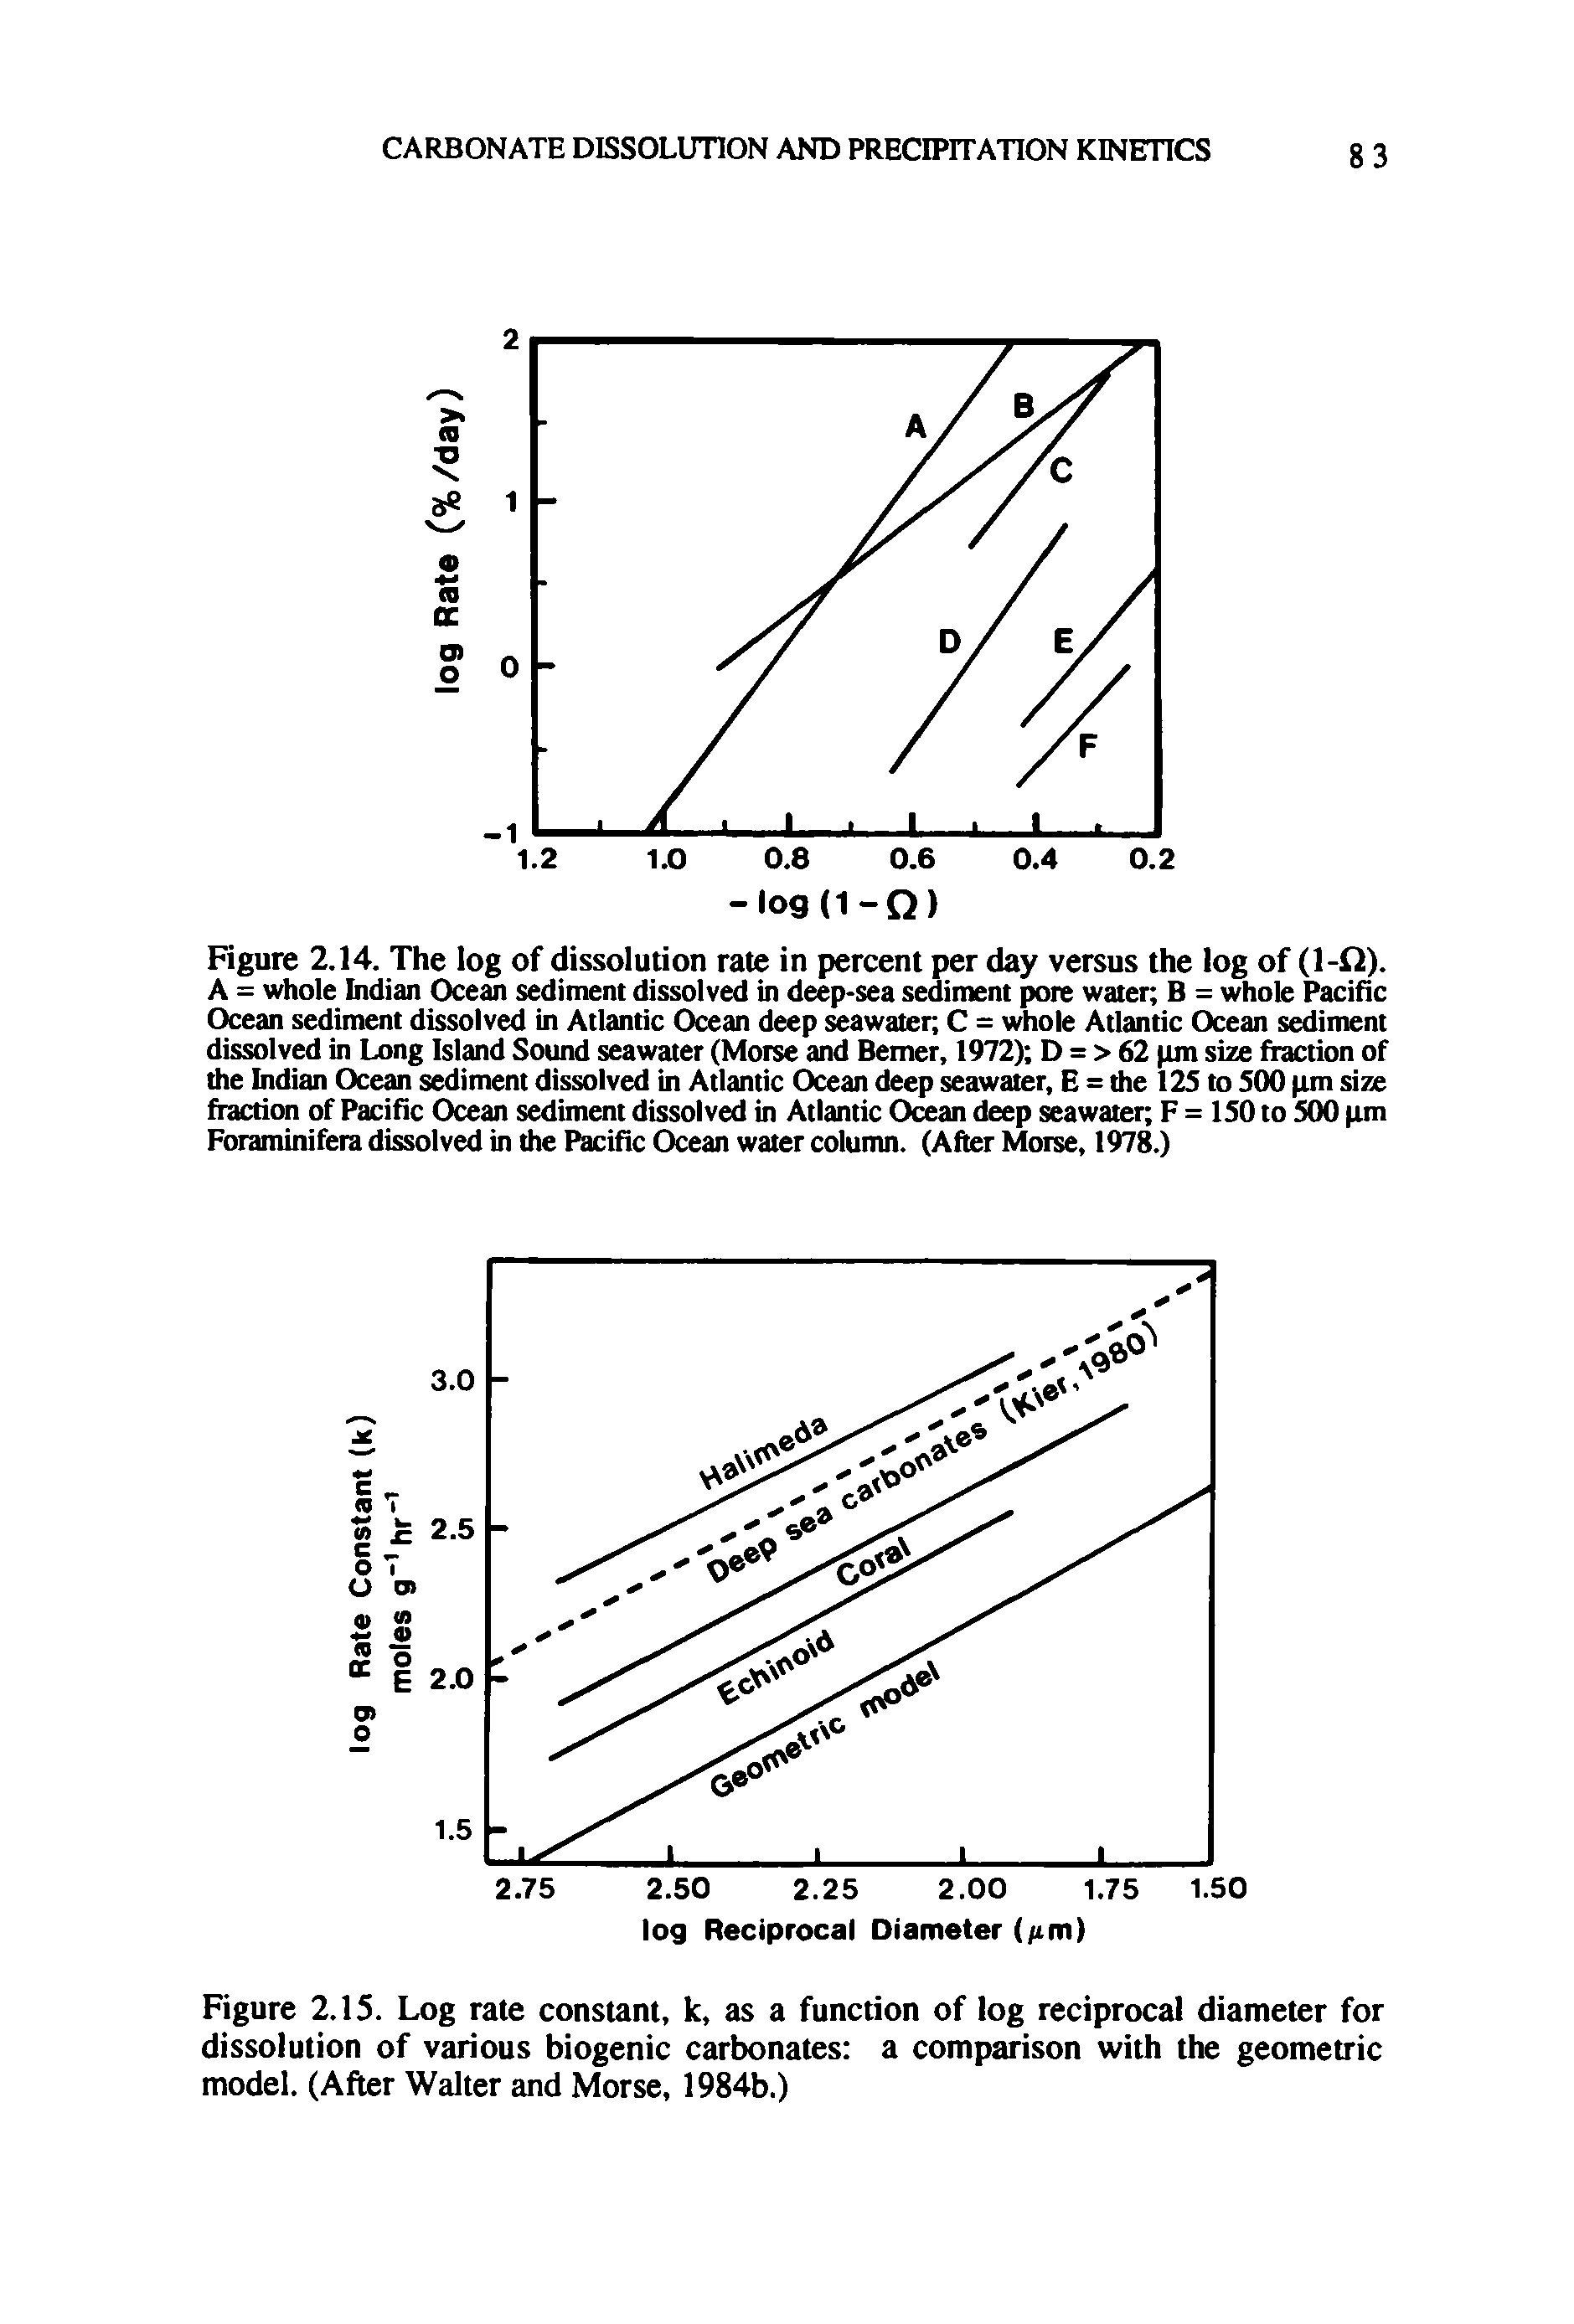 Figure 2.15. Log rate constant, k, as a function of log reciprocal diameter for dissolution of various biogenic carbonates a comparison with the geometric model. (After Walter and Morse, 1984b.)...